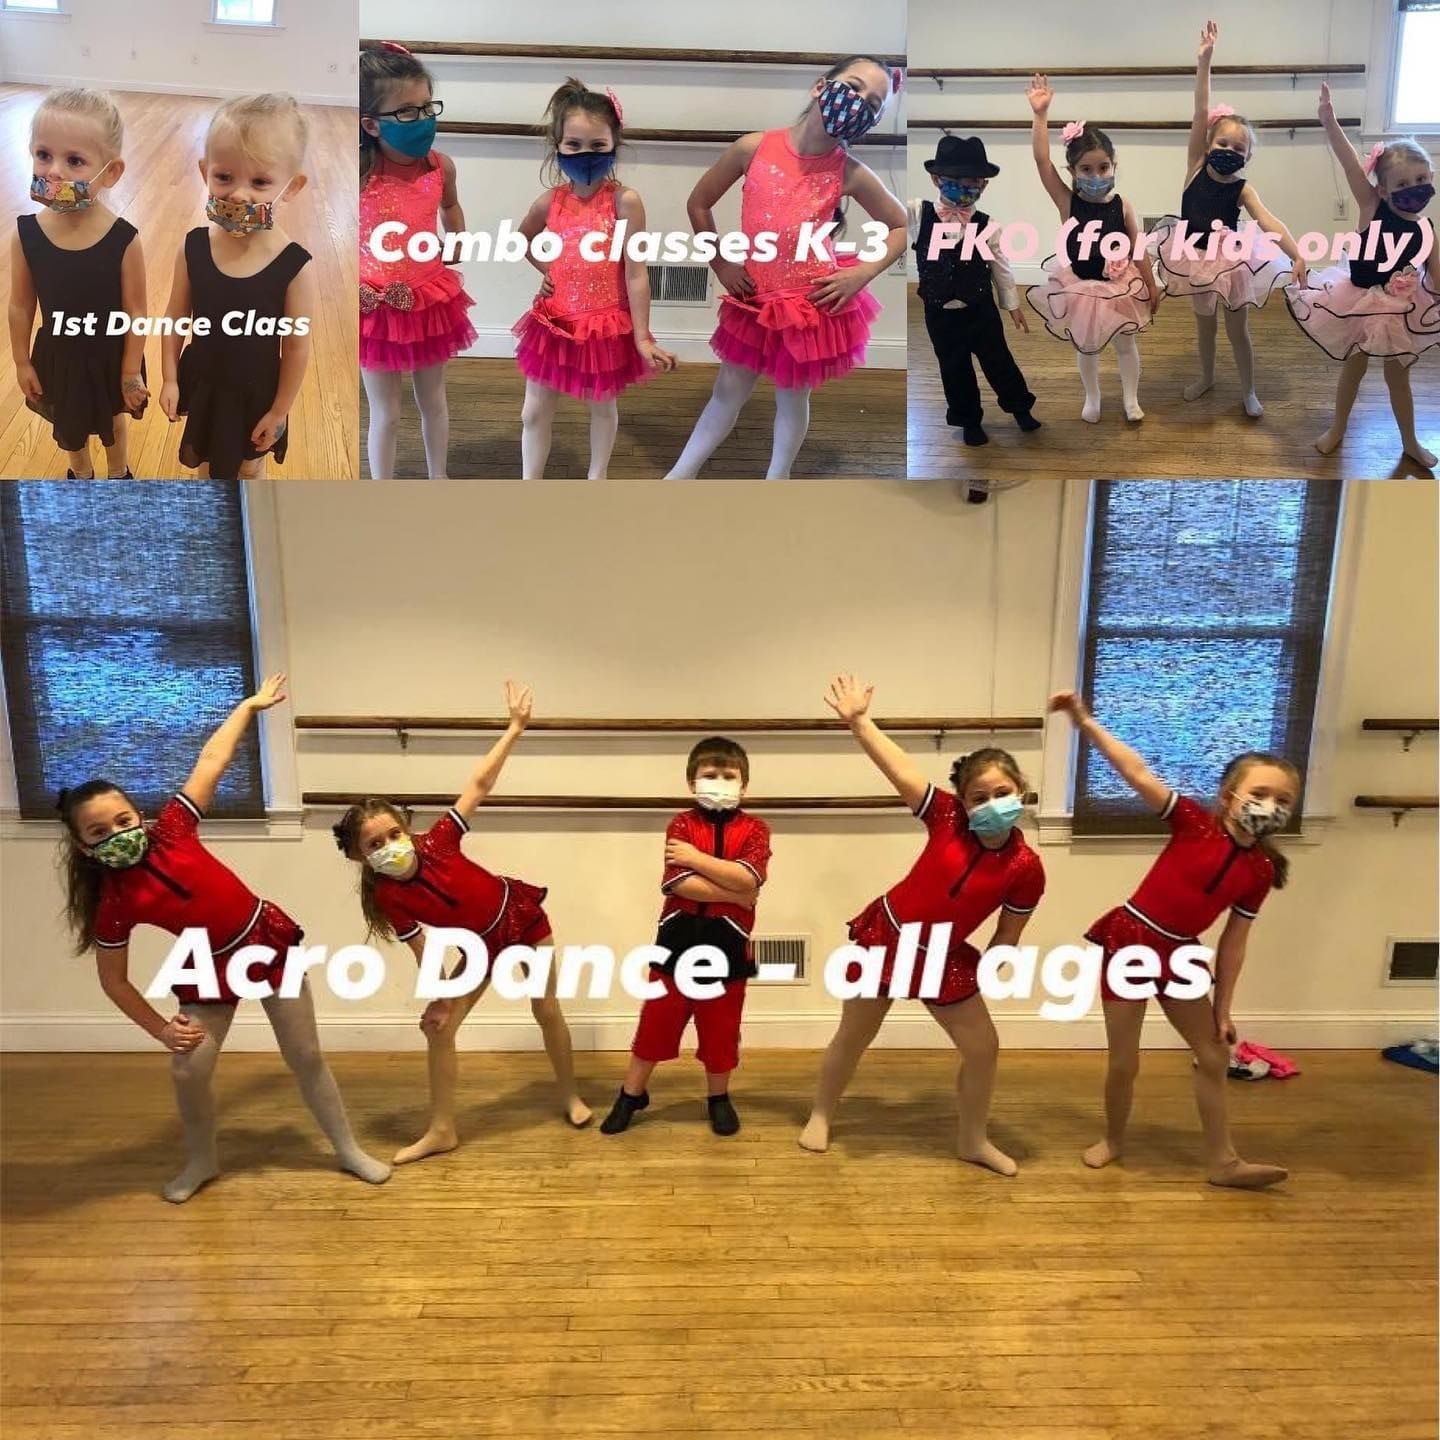 Our Dance Events